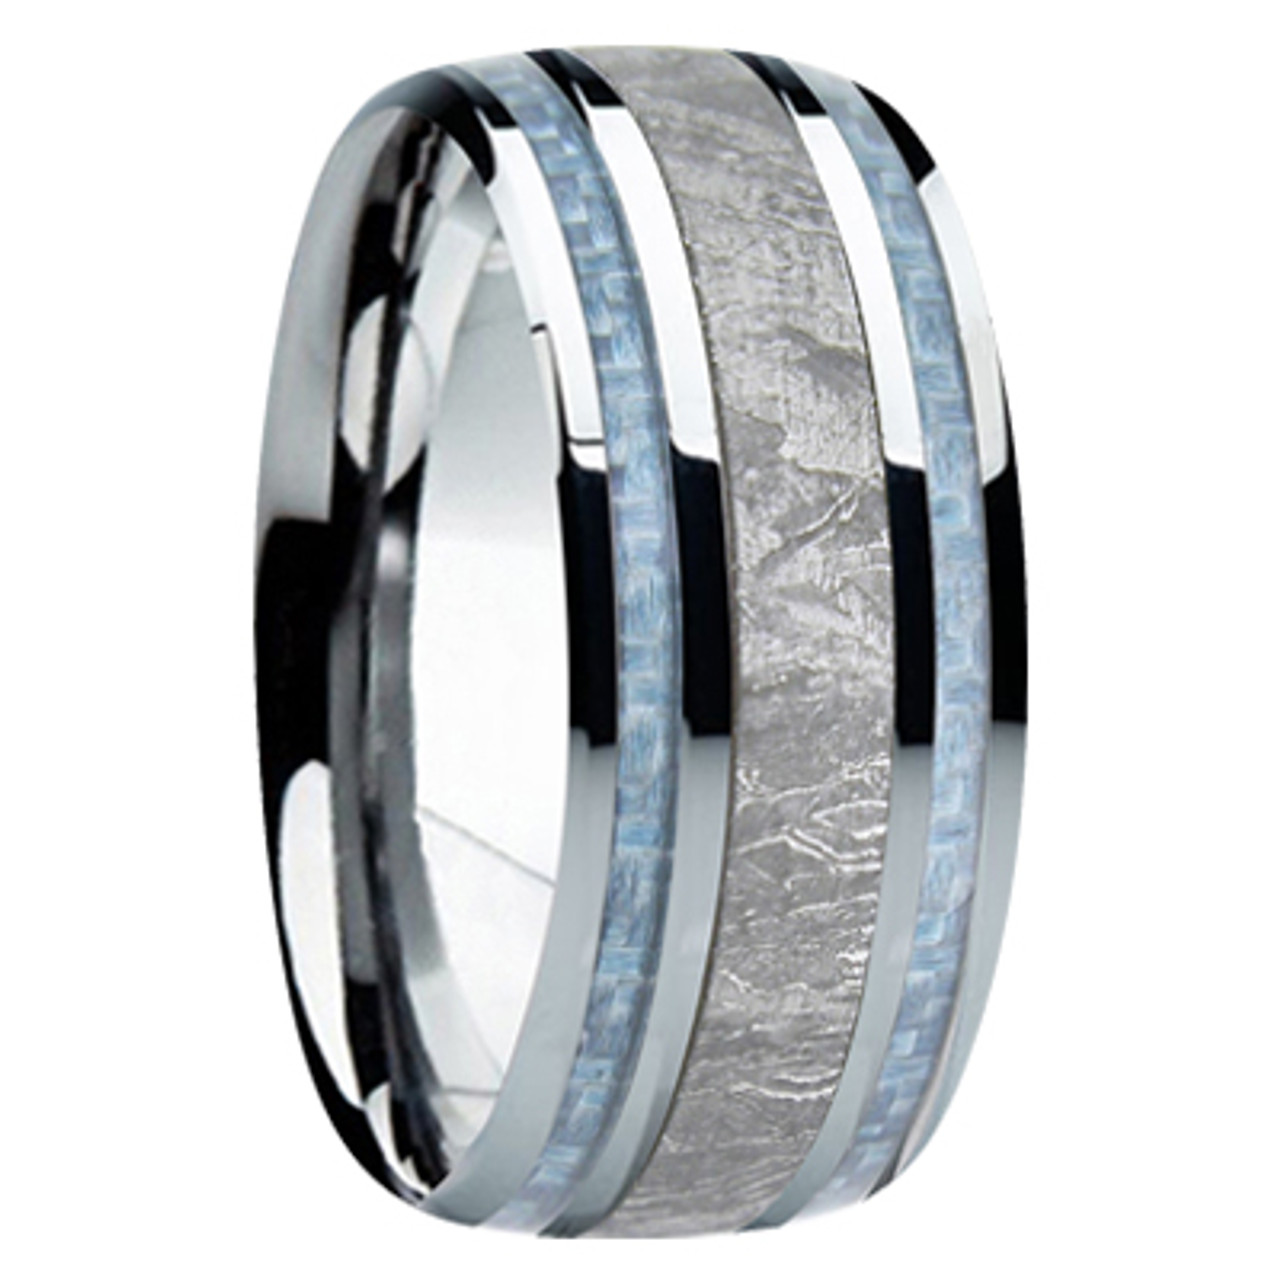 Using Alternative Metals in Jewelry Design: Stainless Steel Jewelry - Made  by CustomMade